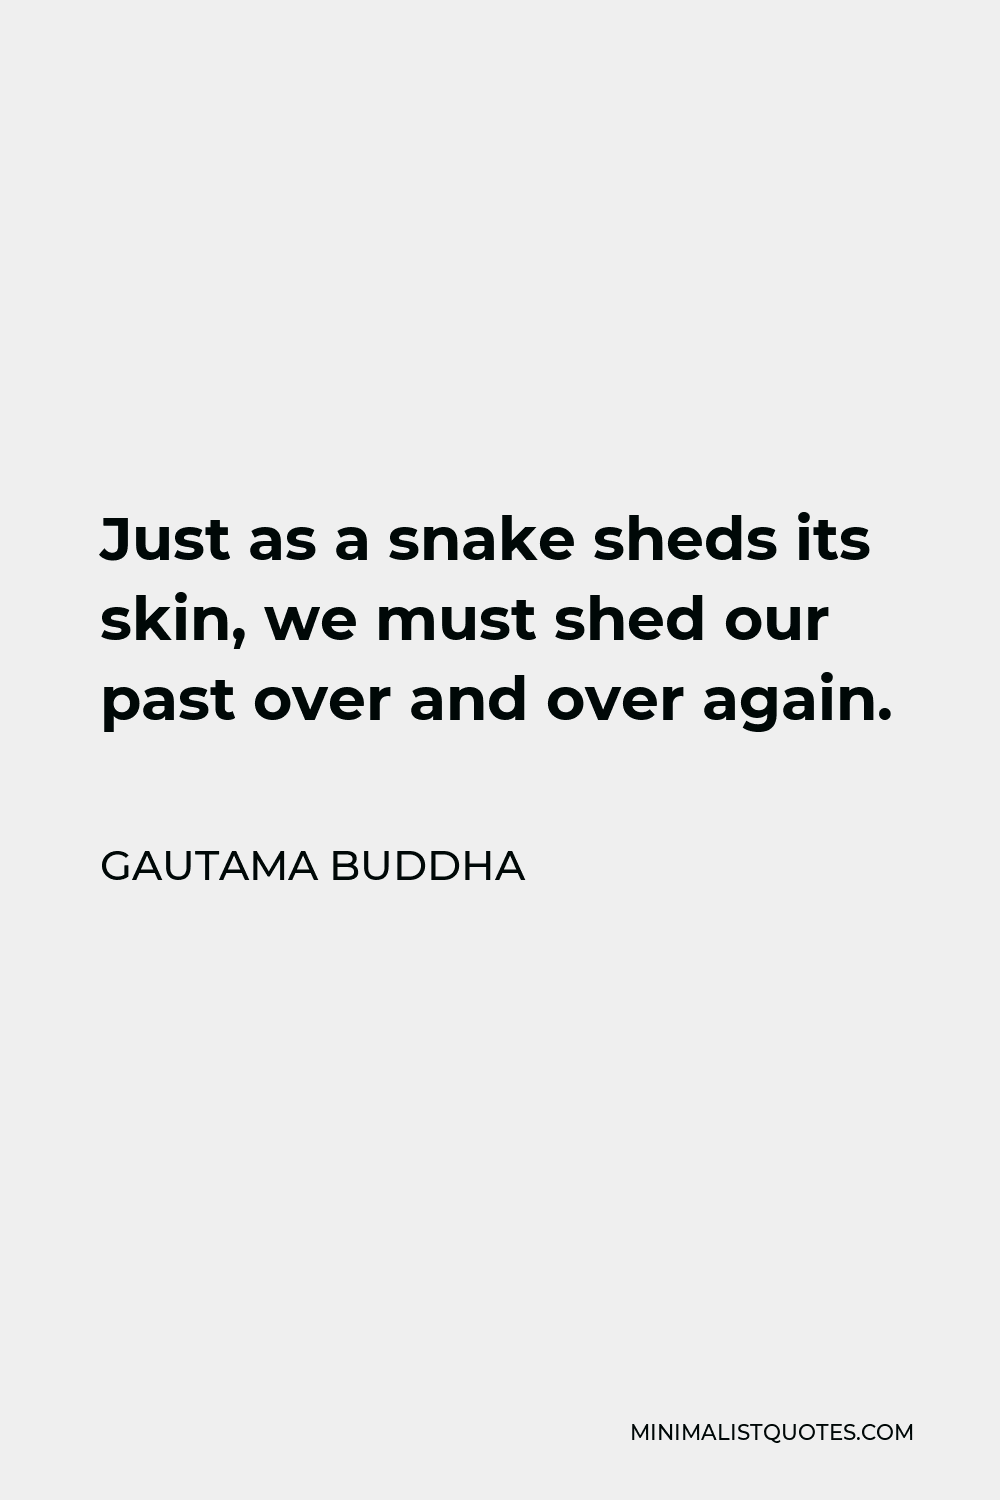 Gautama Buddha Quote - Just as a snake sheds its skin, we must shed our past over and over again.